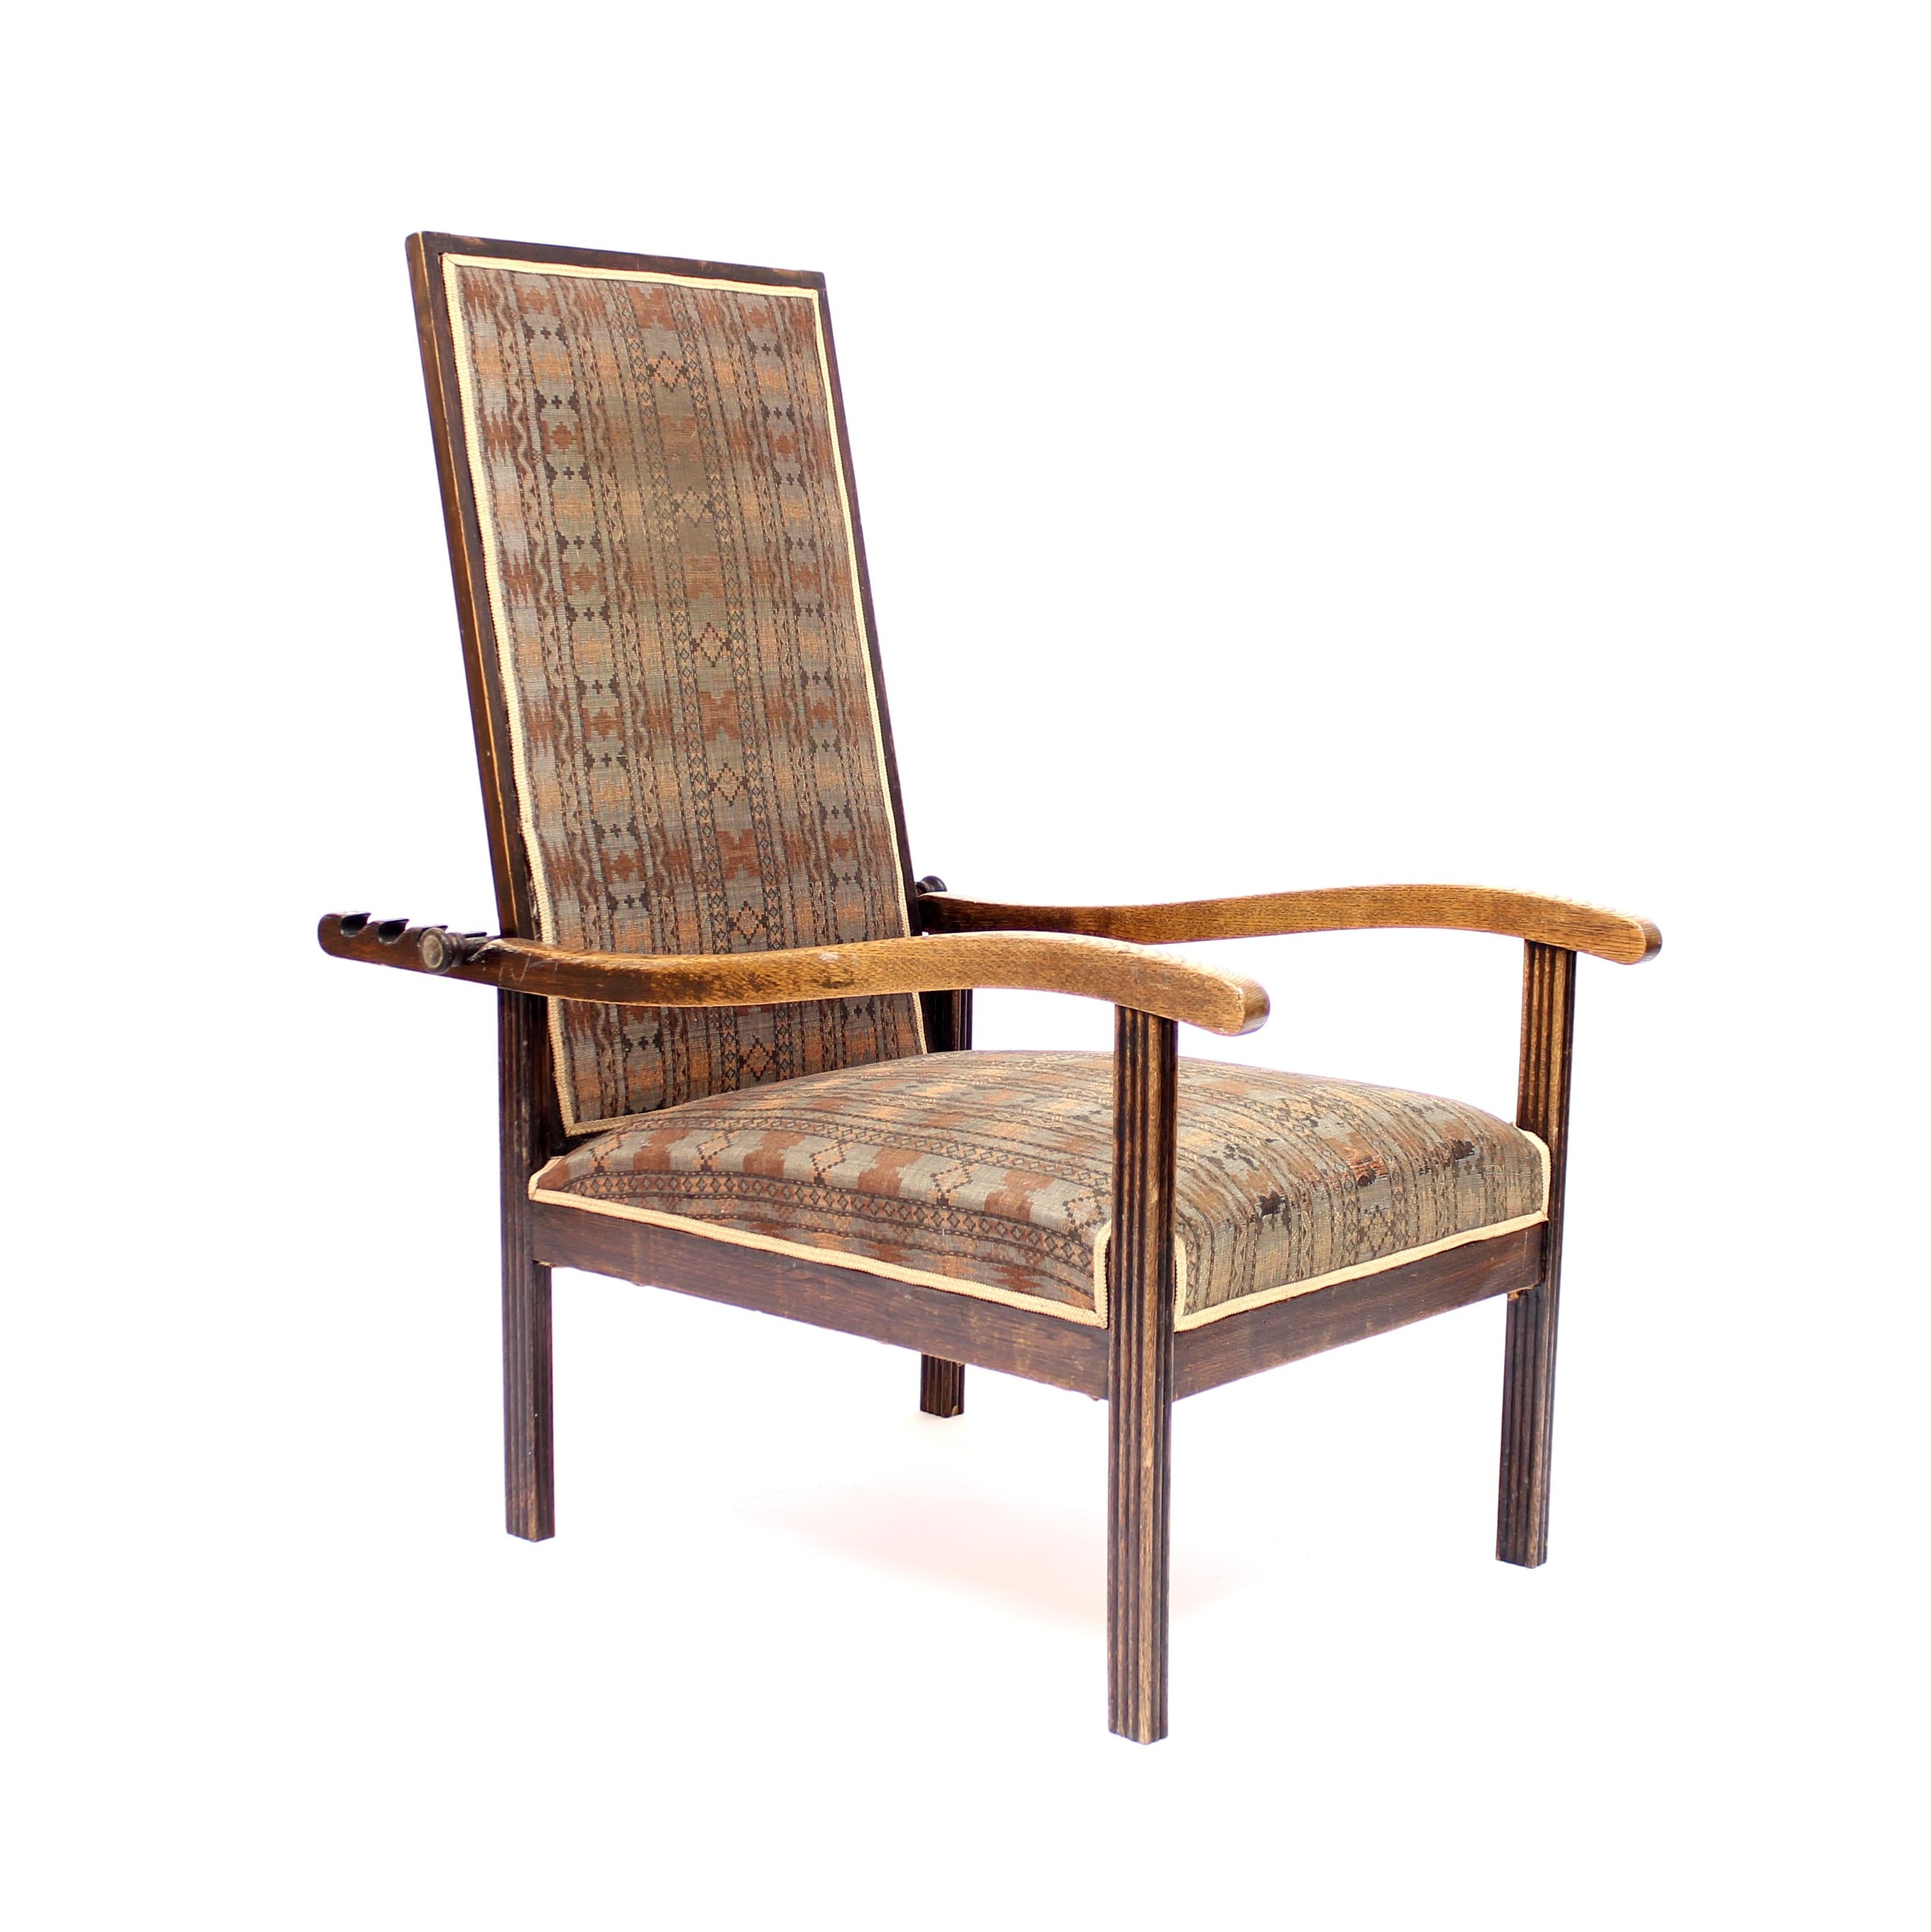 Deep seated Arts & Crafts recliner in oak, possibly English and possibly retailed by Heal's of London, from the early 20th century. Seat and back covered in what is most likely the original fabric. The back can be adjusted in 4 different positions